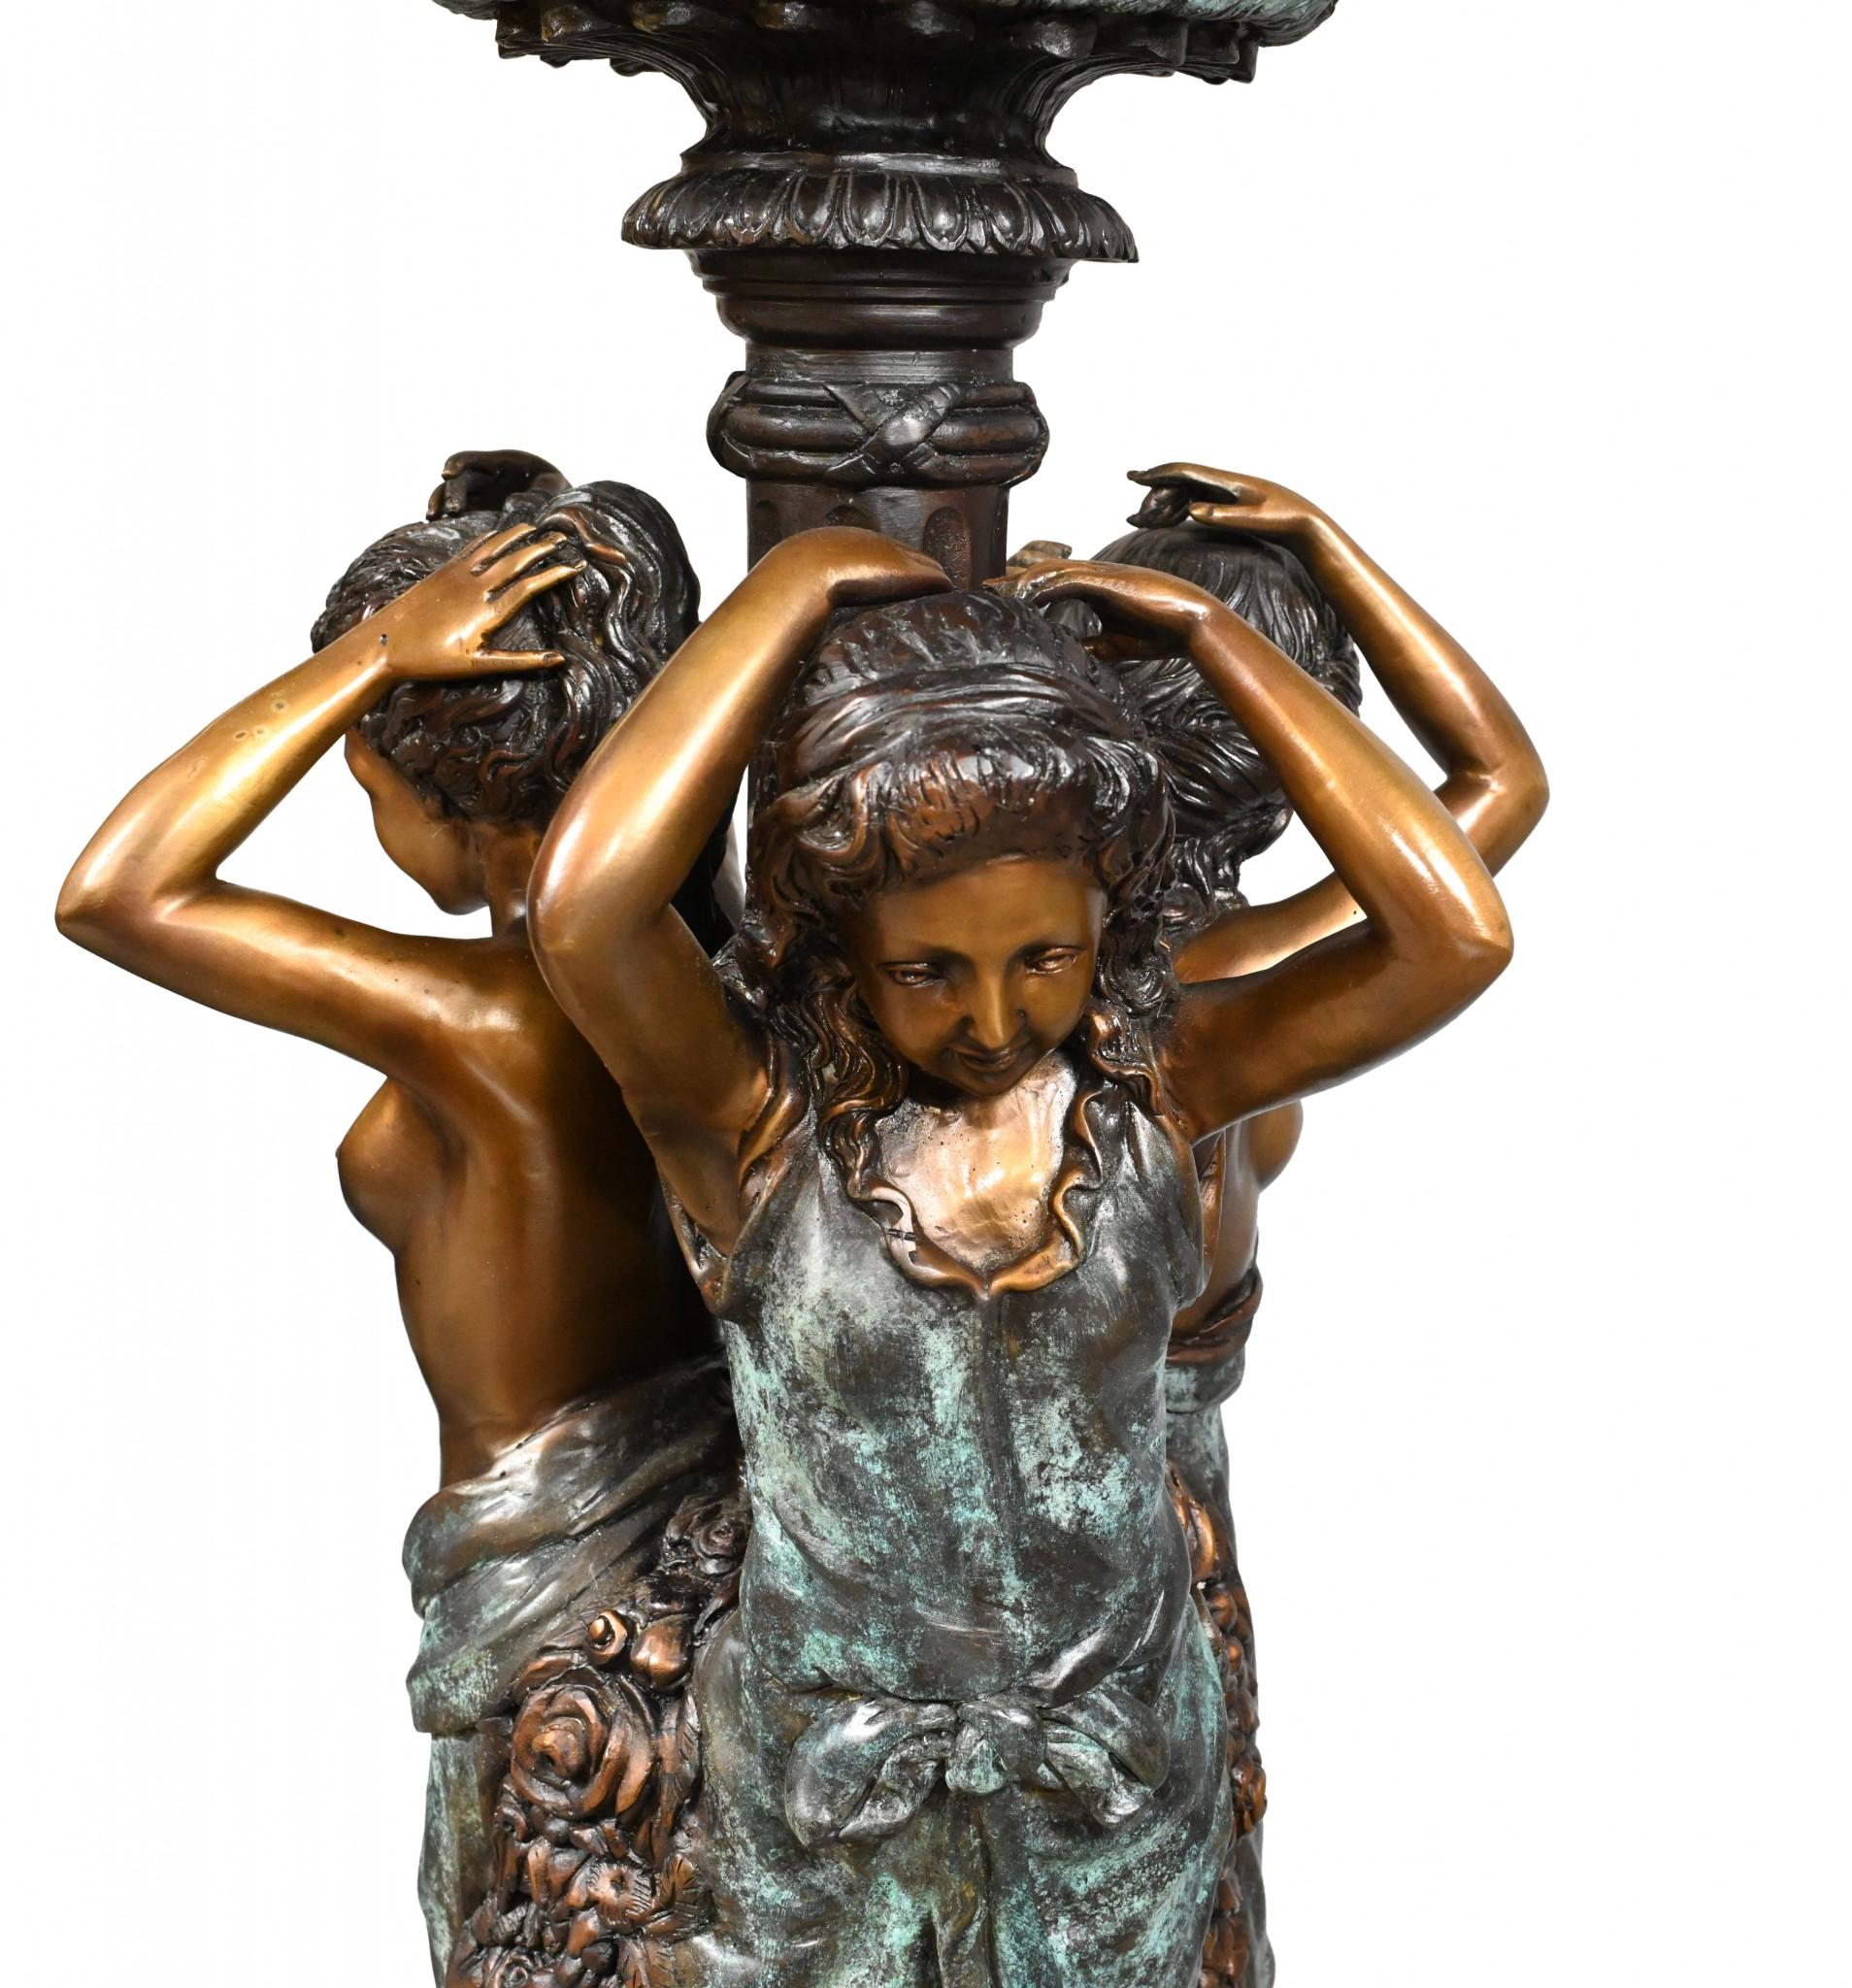 Contemporary Large Bronze Fountain with Maidens, Classical French Garden Water Feature